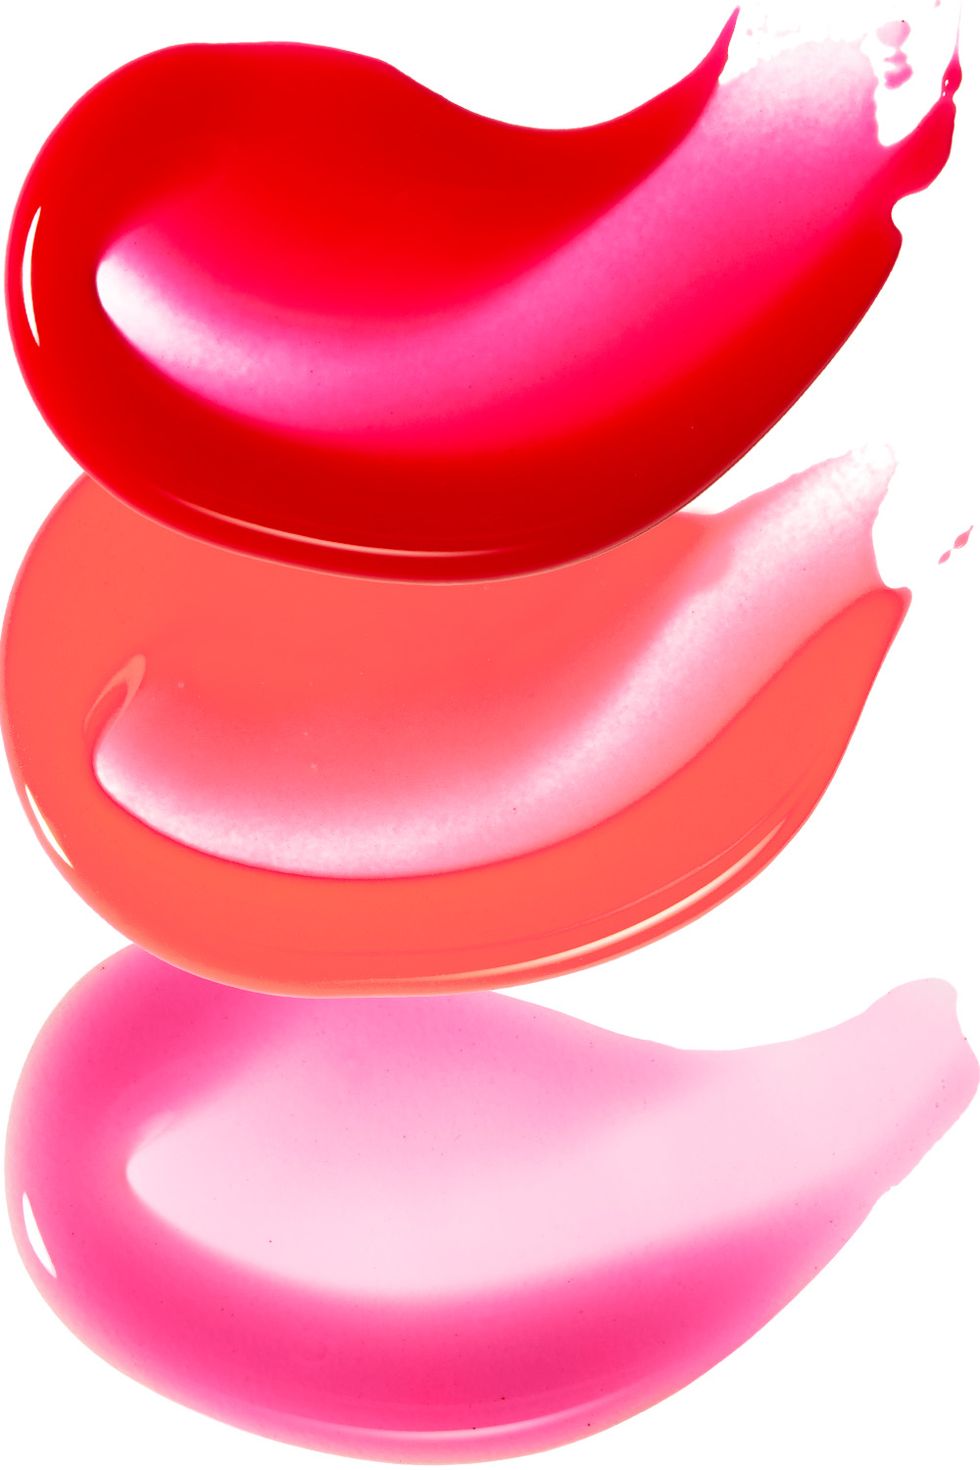 <p>Luscious new lip oils in bright pinks and reds deeply nourish lips while leaving just a hint of color. "A sheer wash brings lips to life without competing with your eye makeup," notes celebrity makeup artist Mélanie Inglessis.<br></p><p><strong>Clinique</strong> Pop Oil Lip & Cheek Glow in Nectar Glow, $18, <a href="http://www.clinique.com/product/1603/40007/Makeup/Lip-Glosses/Clinique-Pop-Oil-Lip-Cheek-Glow?cm_mmc=Paid_Search-_-Google-_-Google_Shopping-_-Makeup+-+Lip" target="_blank">clinique.com</a> ; <strong>Lancôme</strong> Juicy Shaker Pigment-Infused Bi-Phase Lip Oil in Apri-Cute, $21, <a href="http://www.lancome-usa.com/Juicy-Shaker/1000698,default,pd.html" target="_blank">lancome-usa.com</a>; <strong>Julep</strong> Tinted Lip Oil Treatment in Covet, $20, <a href="http://www.julep.com/your-lip-addiction.html" target="_blank">julep.com</a>. </p>